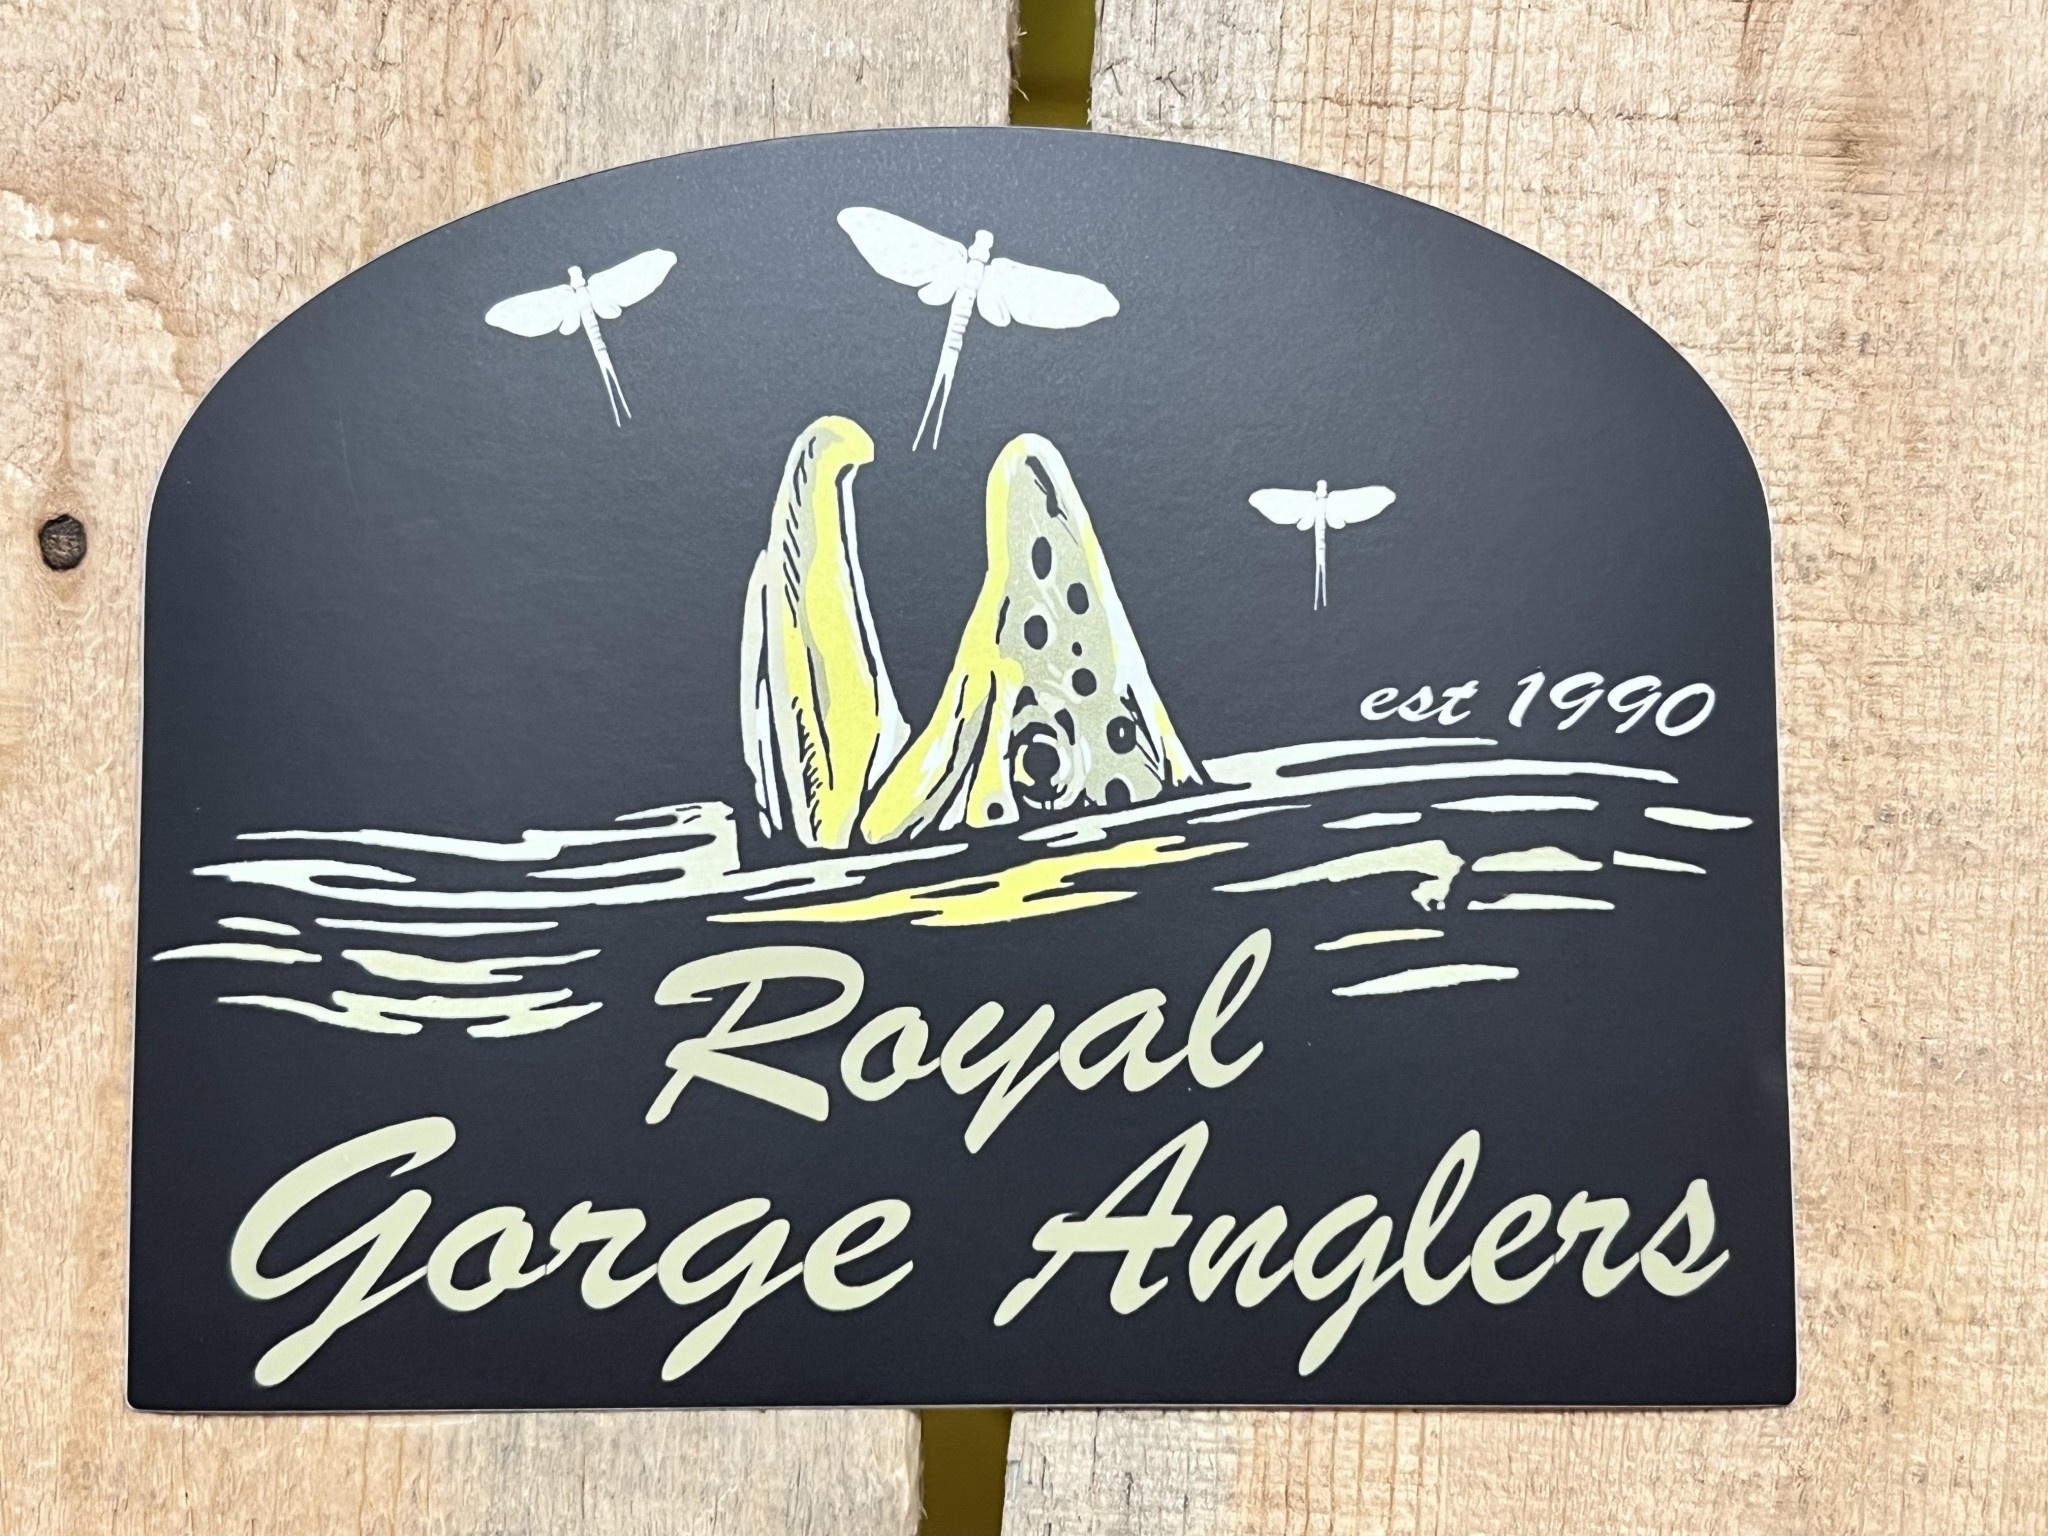 Fly Fishing Stickers - Royal Gorge Anglers